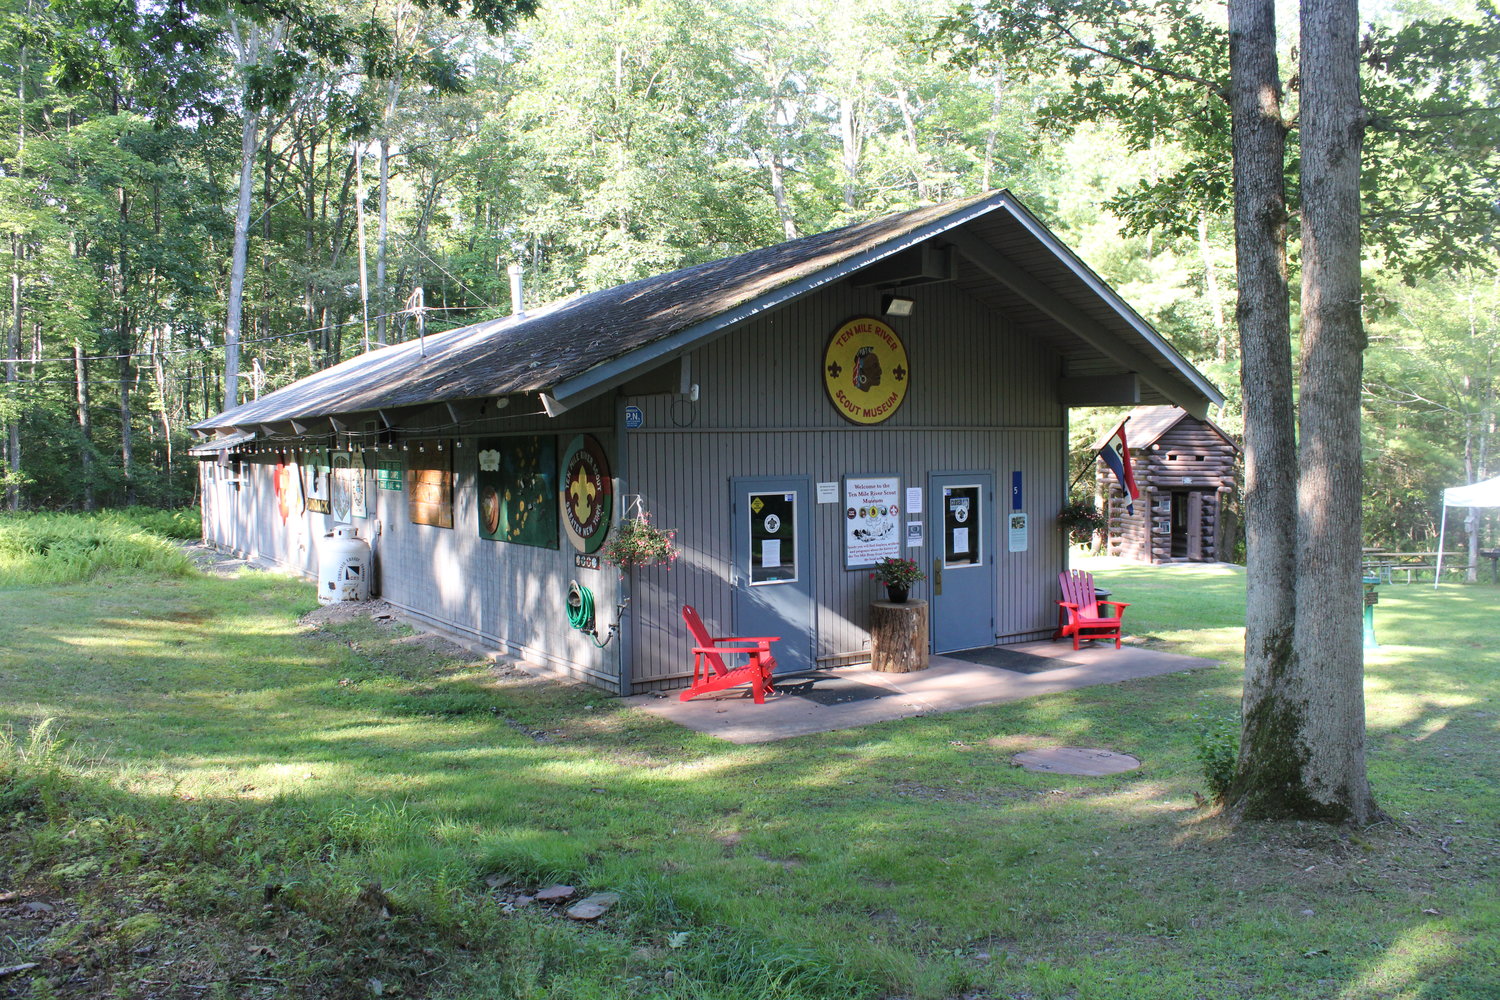 The Ten Mile River Museum is home to many memories.